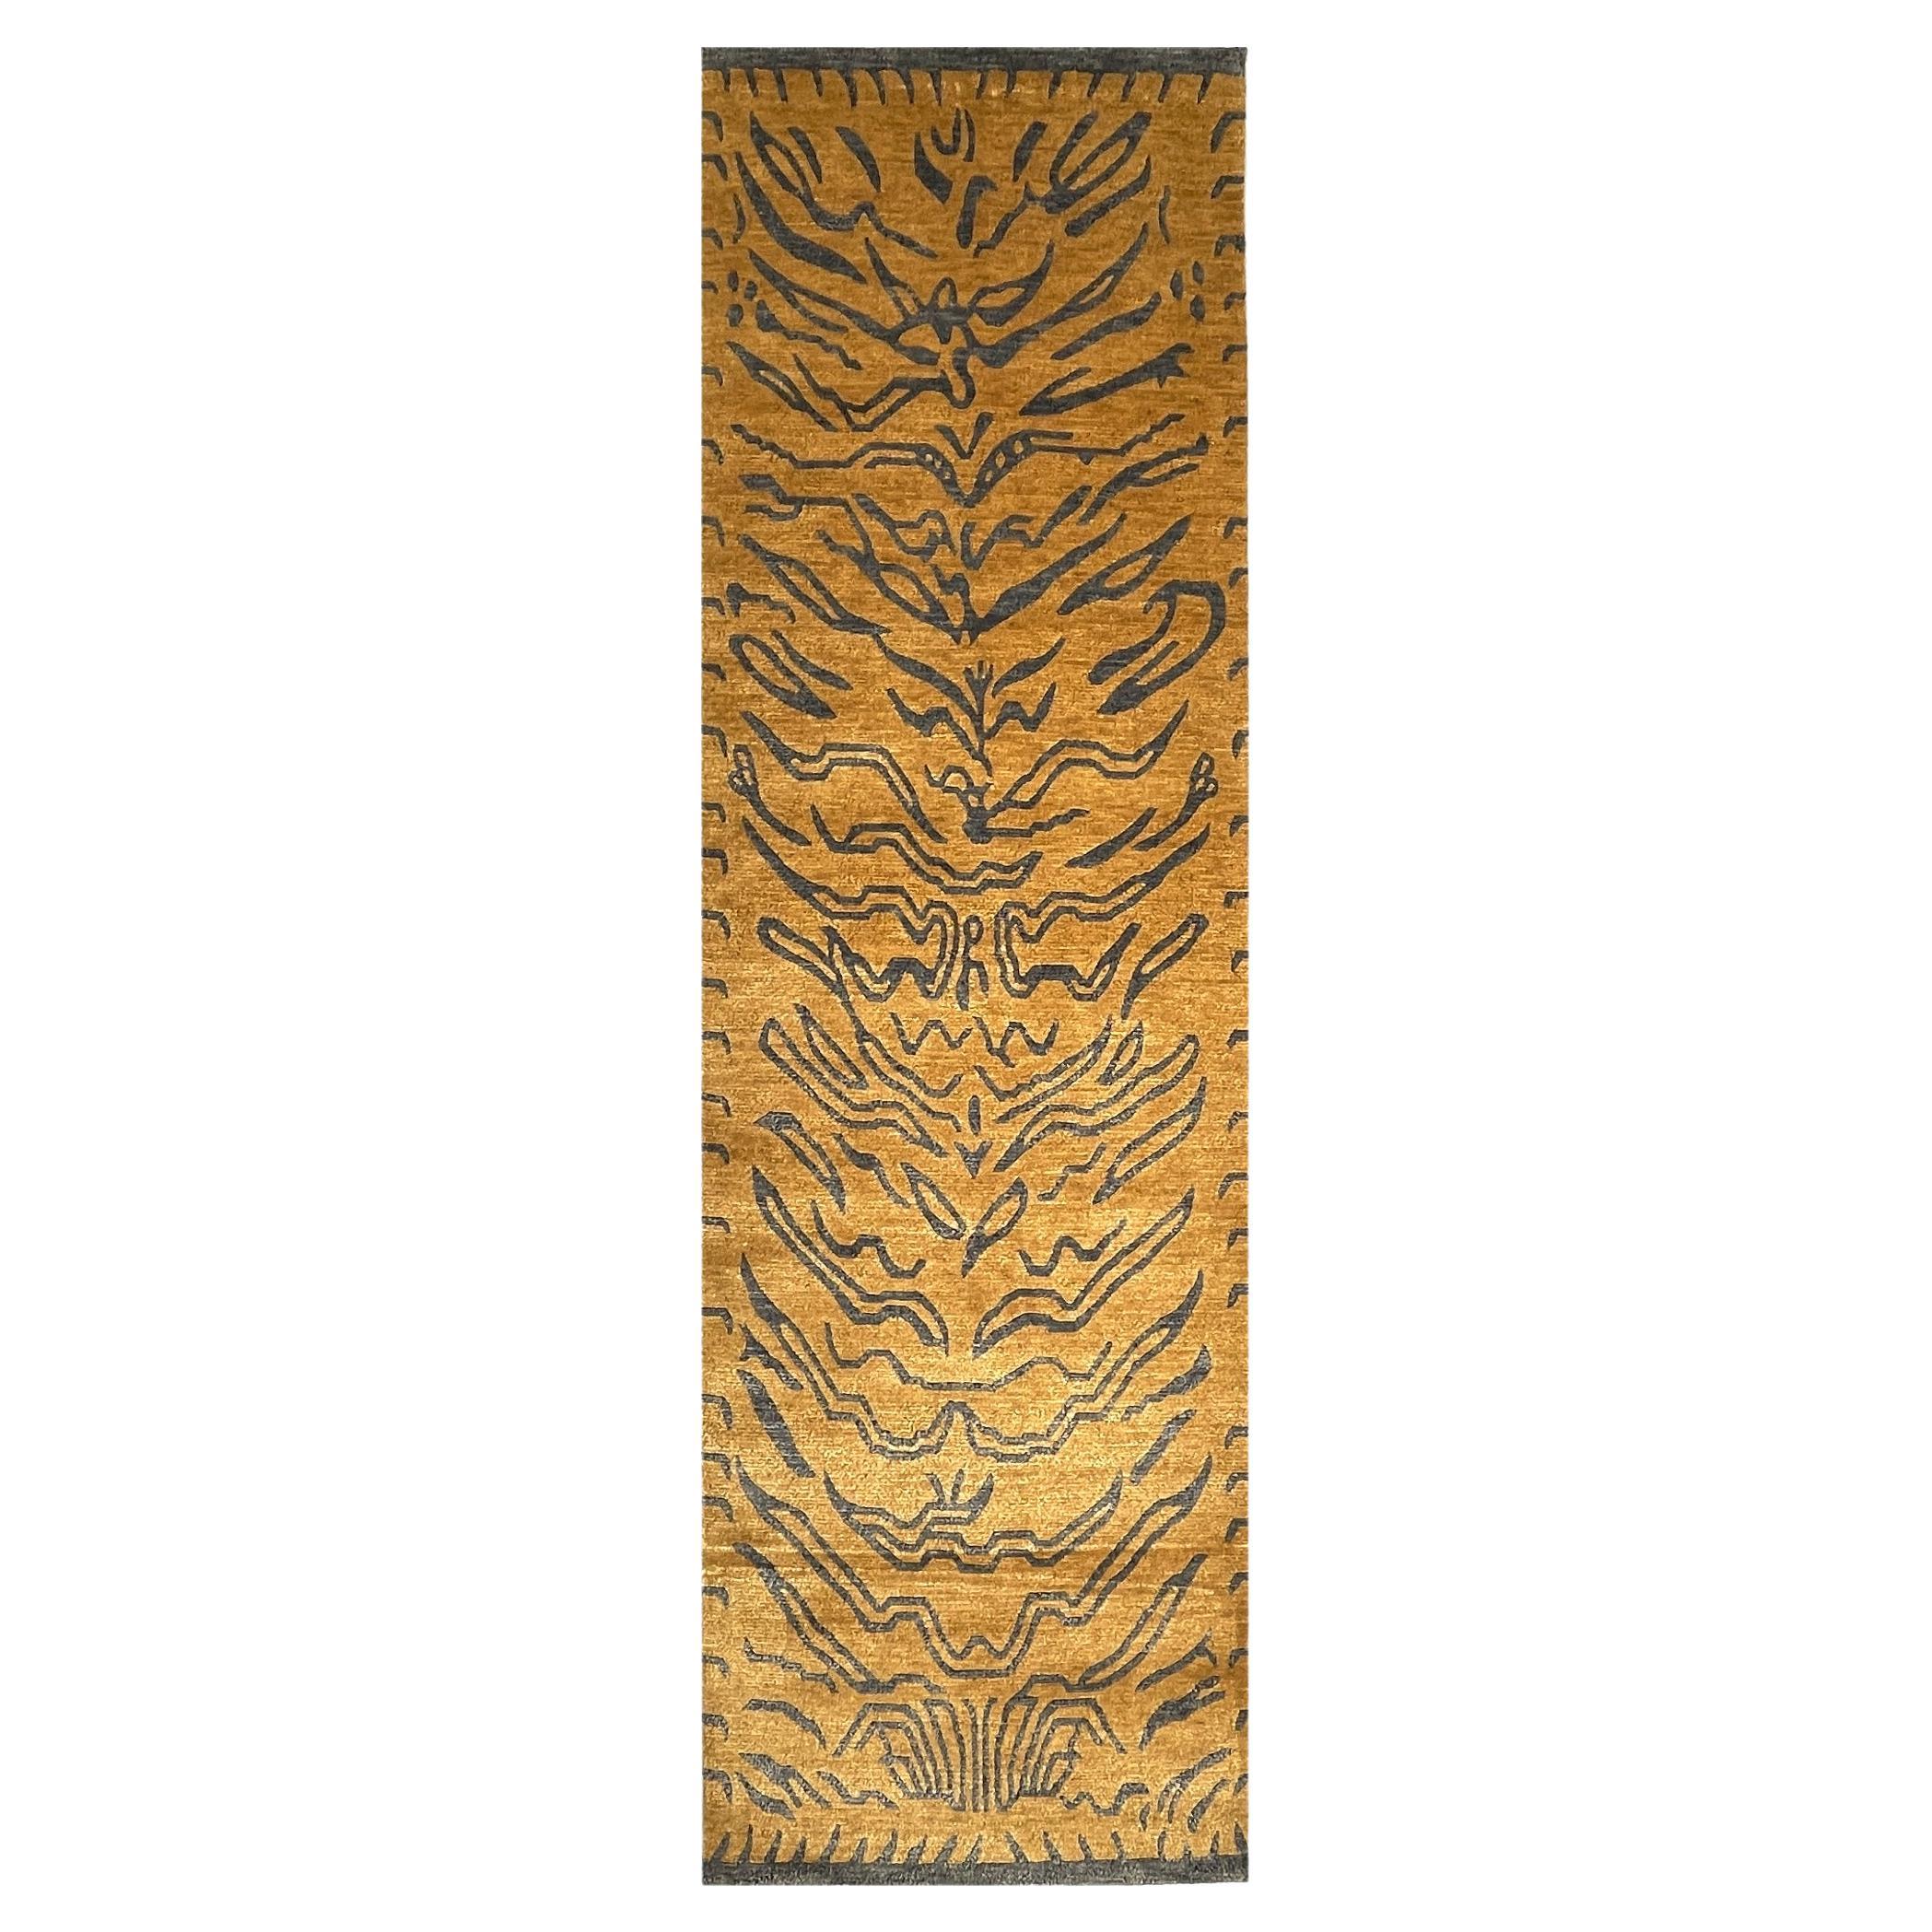 Tibetan Tiger Rug Hand Knotted Wool Silk Amber Charcoal by Djoharian Collection